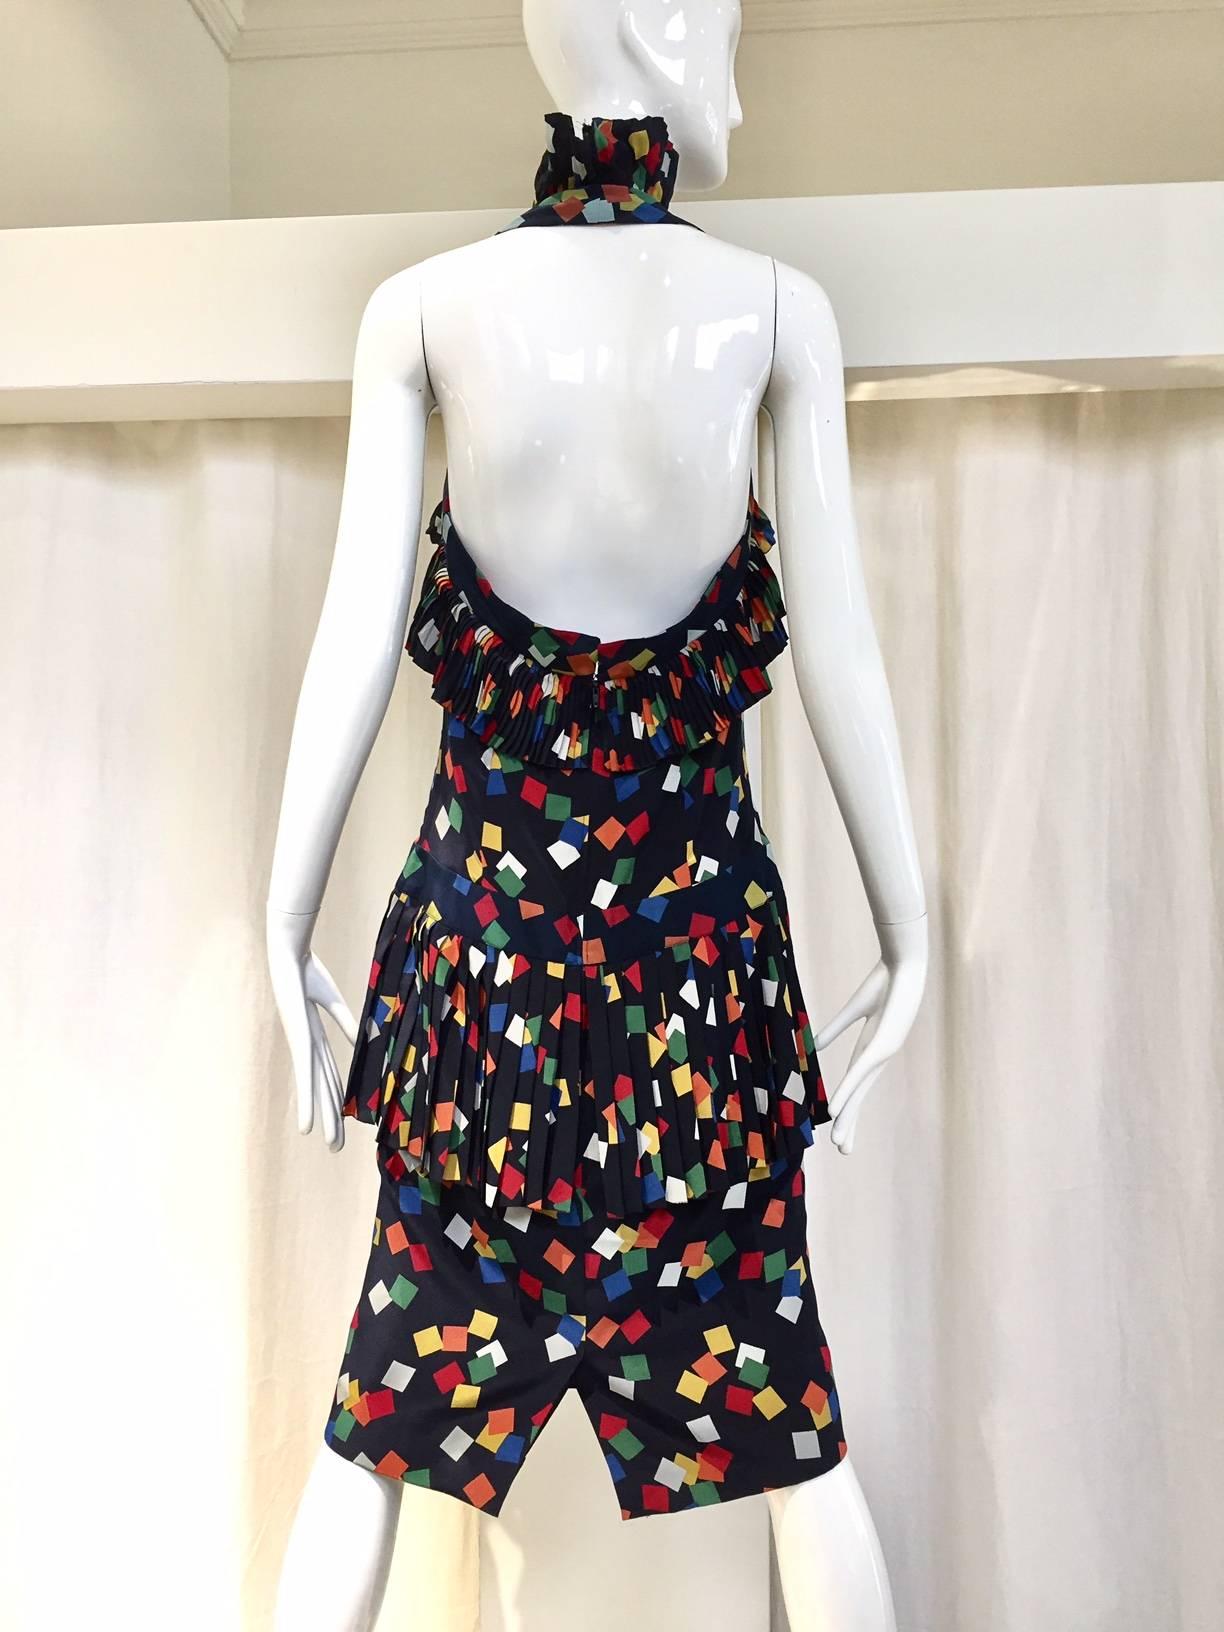 Sexy and chic 80s CHLOE navy blue, orange, red, white and red confetti print silk  halter ruffle dress.  made in france.
Size 4/6/ Small - medium